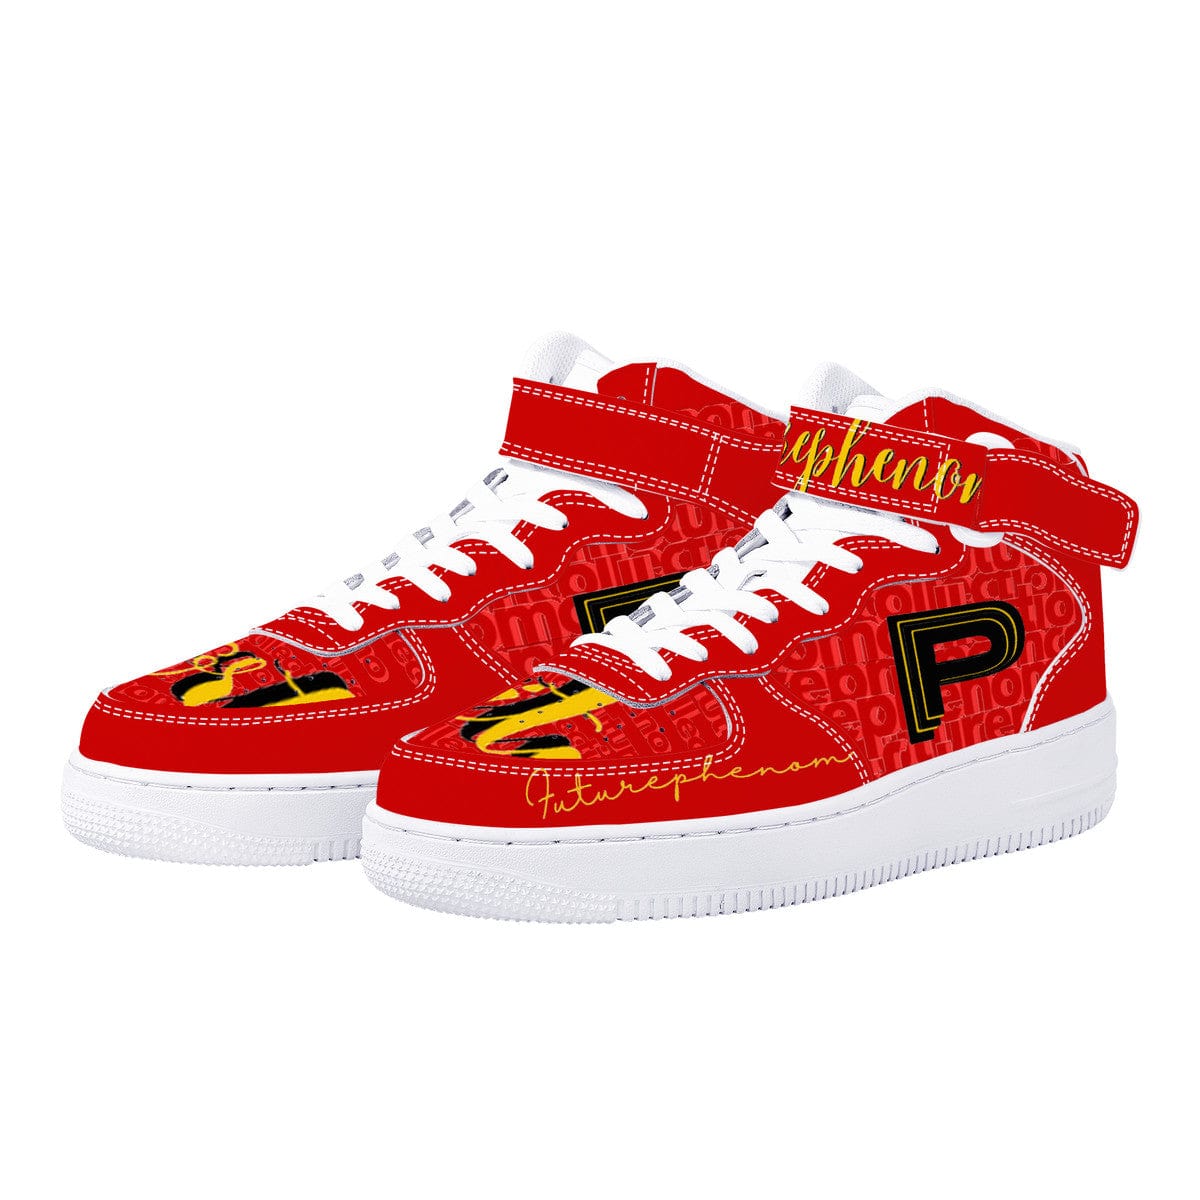 sneaker The City on fire signature edition shoes